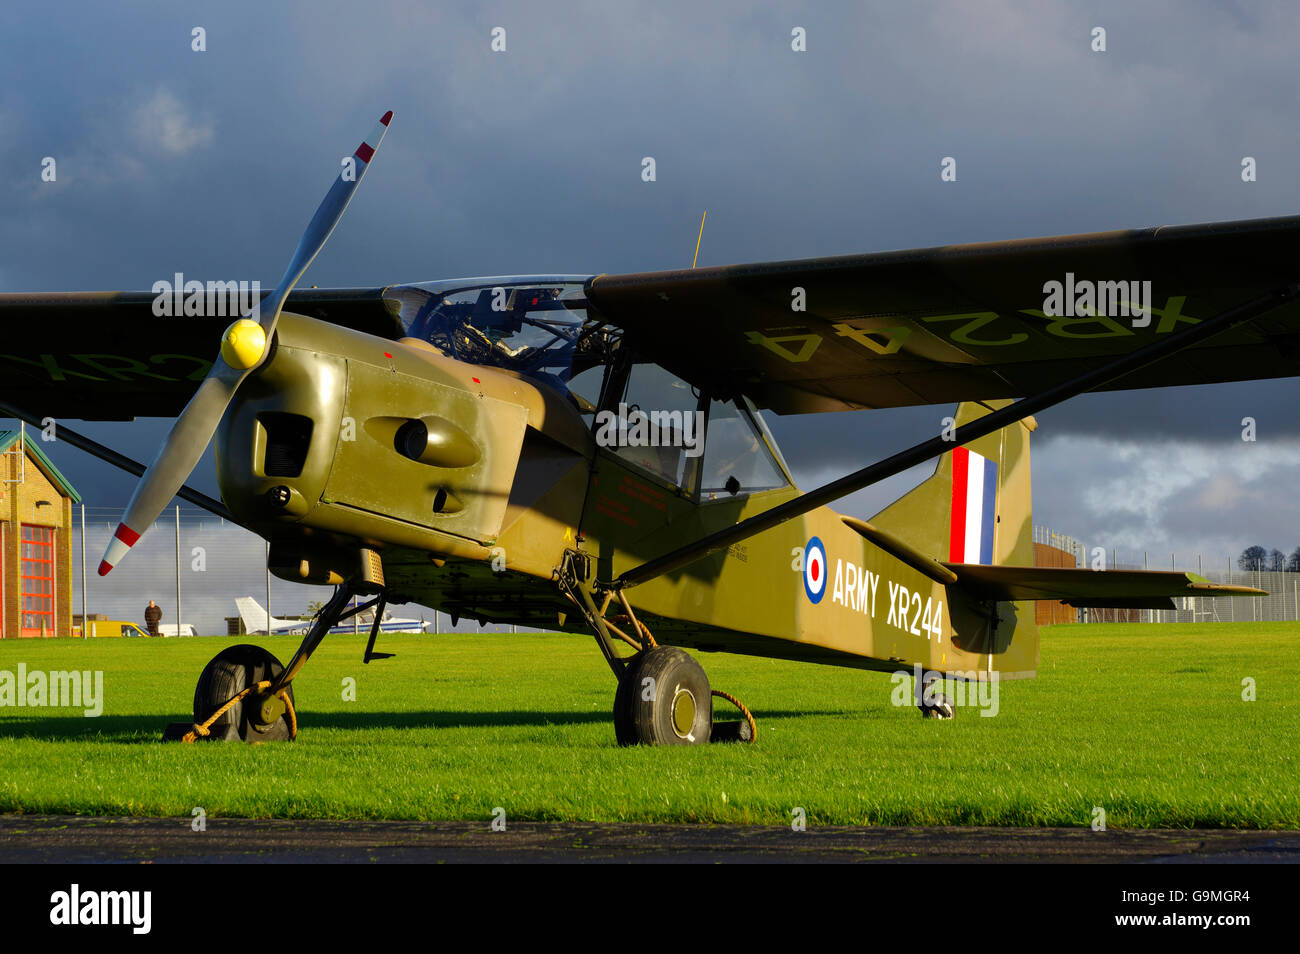 Army Air Corps, Auster AOP 9 XR244, G-CICR, Middle Wallop, England, United Kingdom. Stock Photo